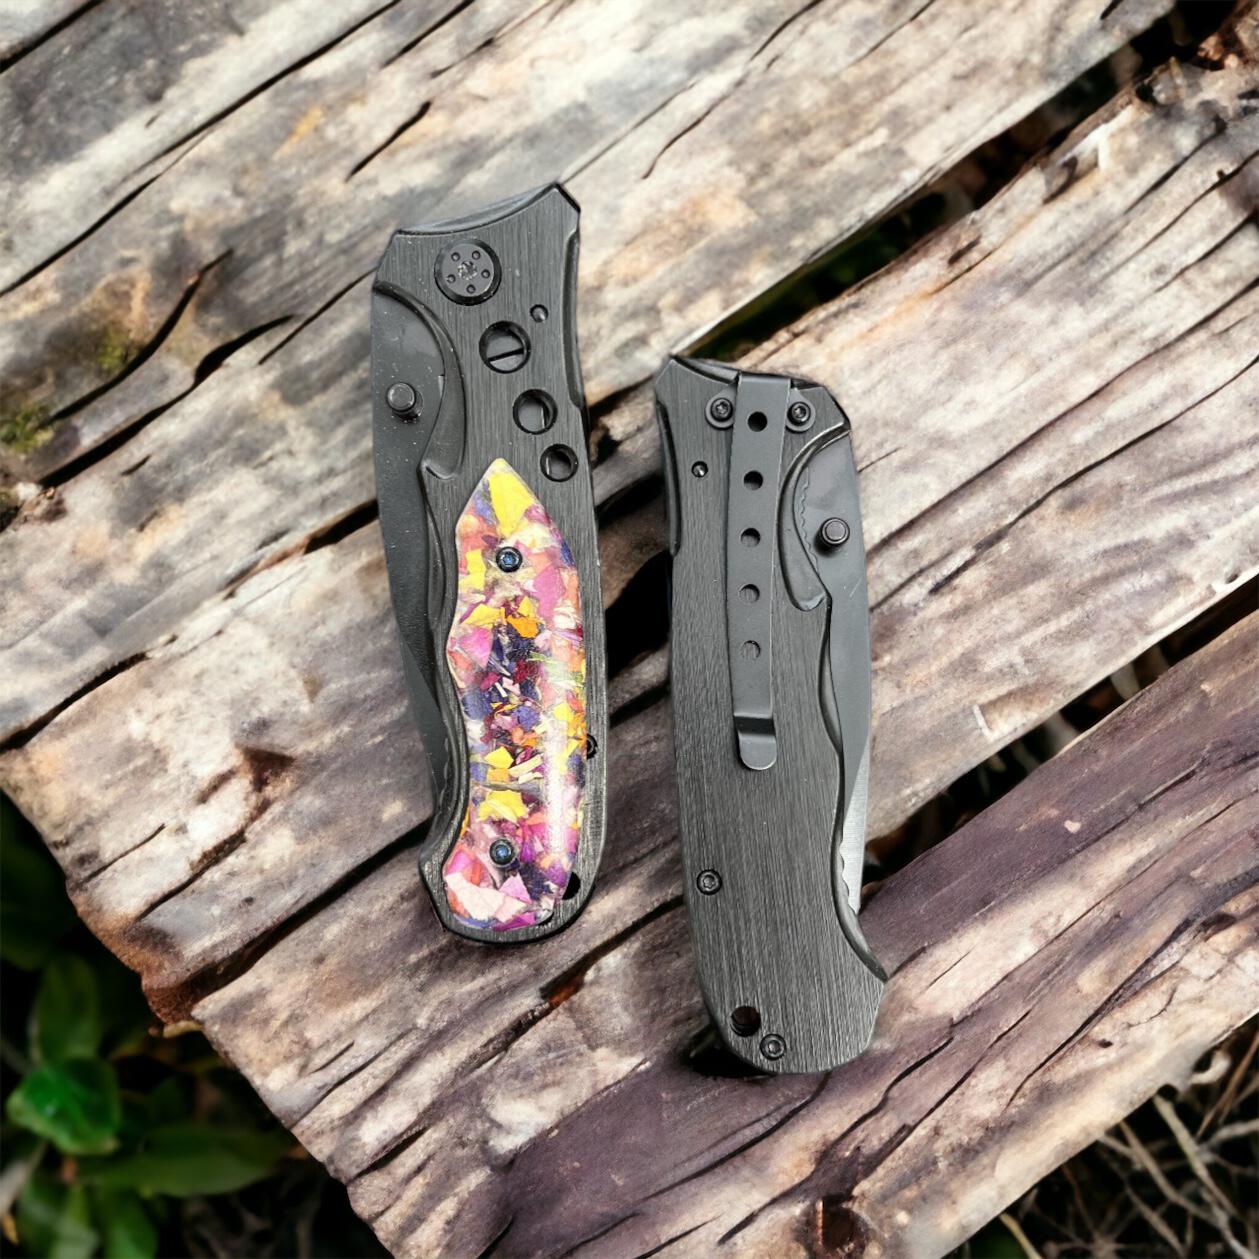 Memorial Knife made with flower petals